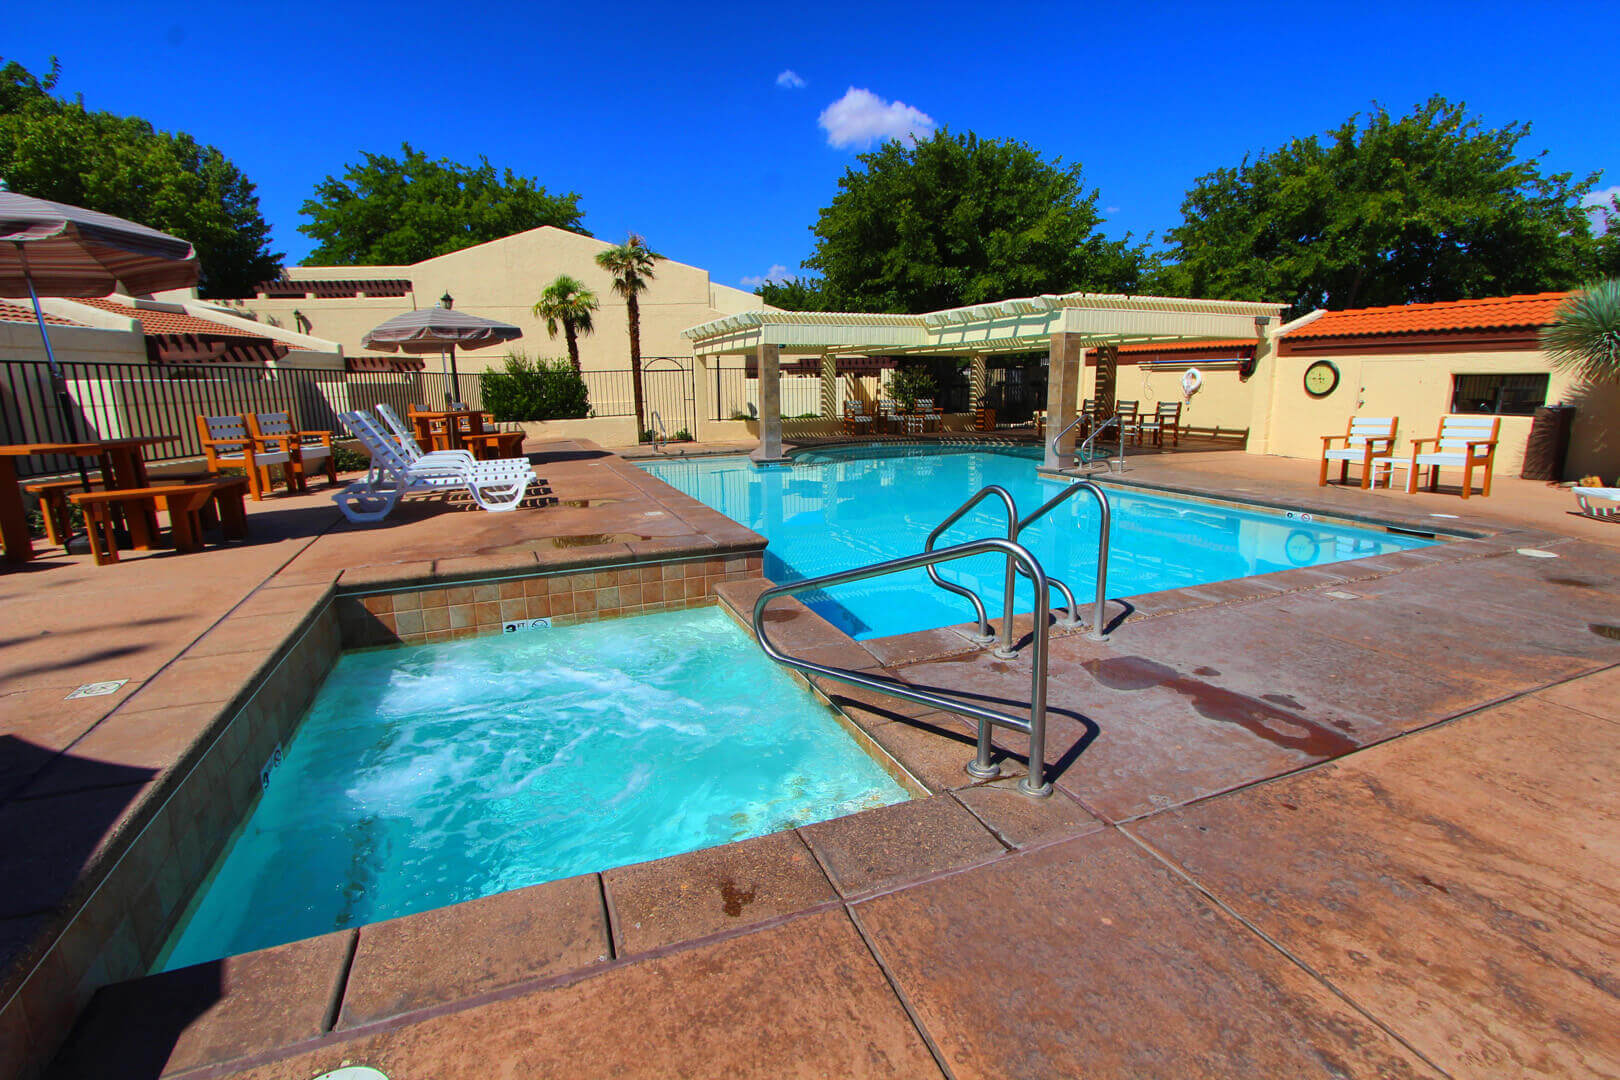 A refreshing outdoor swimming pool and Jacuzzi at VRI's Villas at South Gate in St. George, Utah.